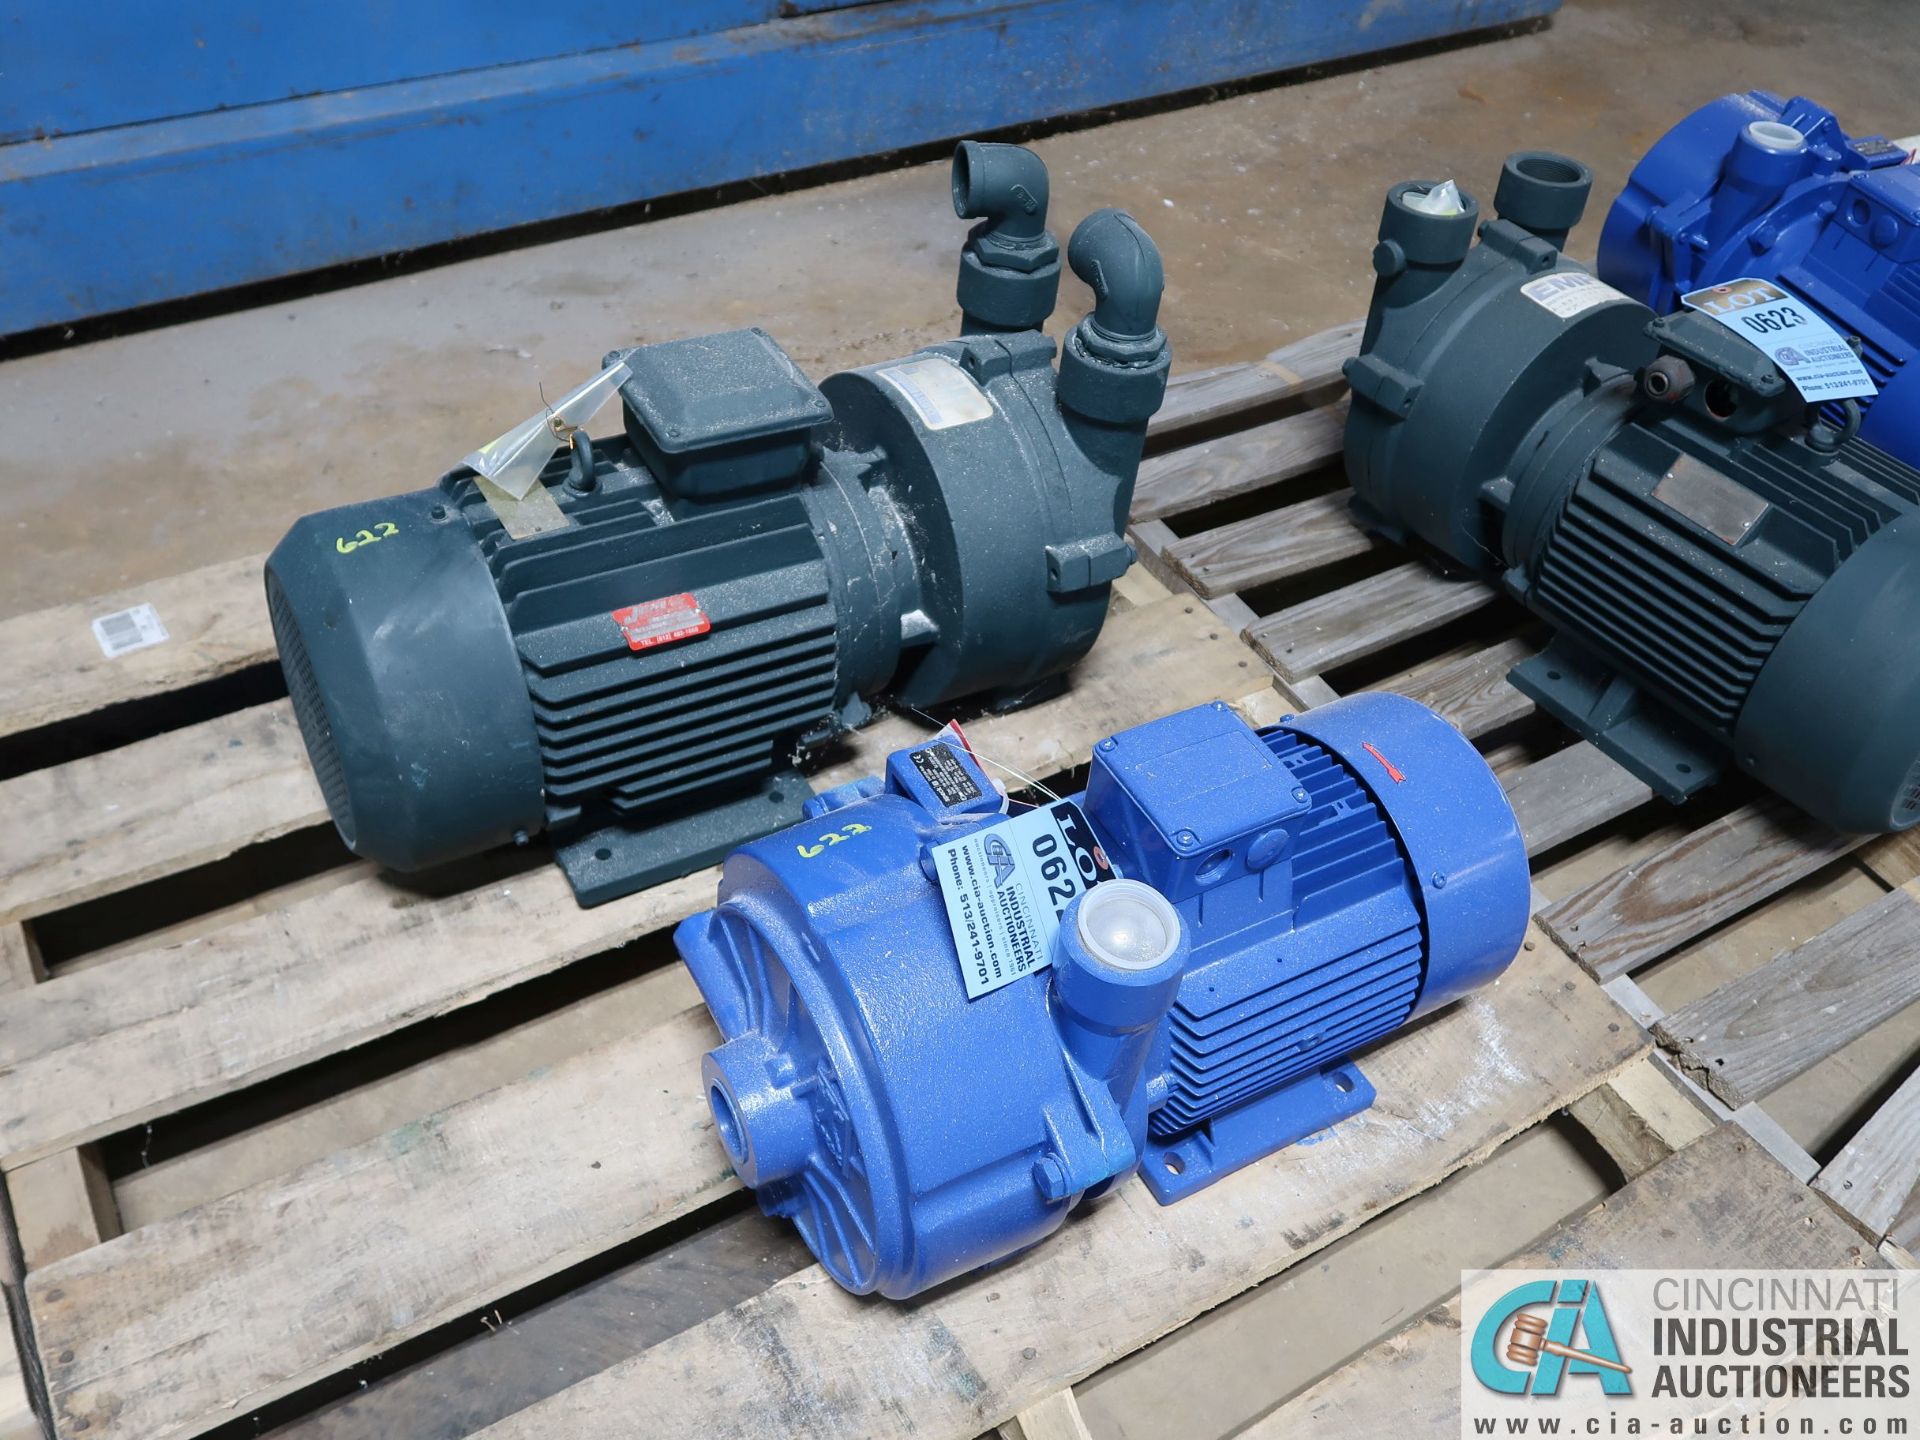 (1) 7.5 HP AND (1) 5 HP (APPROX.) NEW ELECTRIC WATER PUMPS